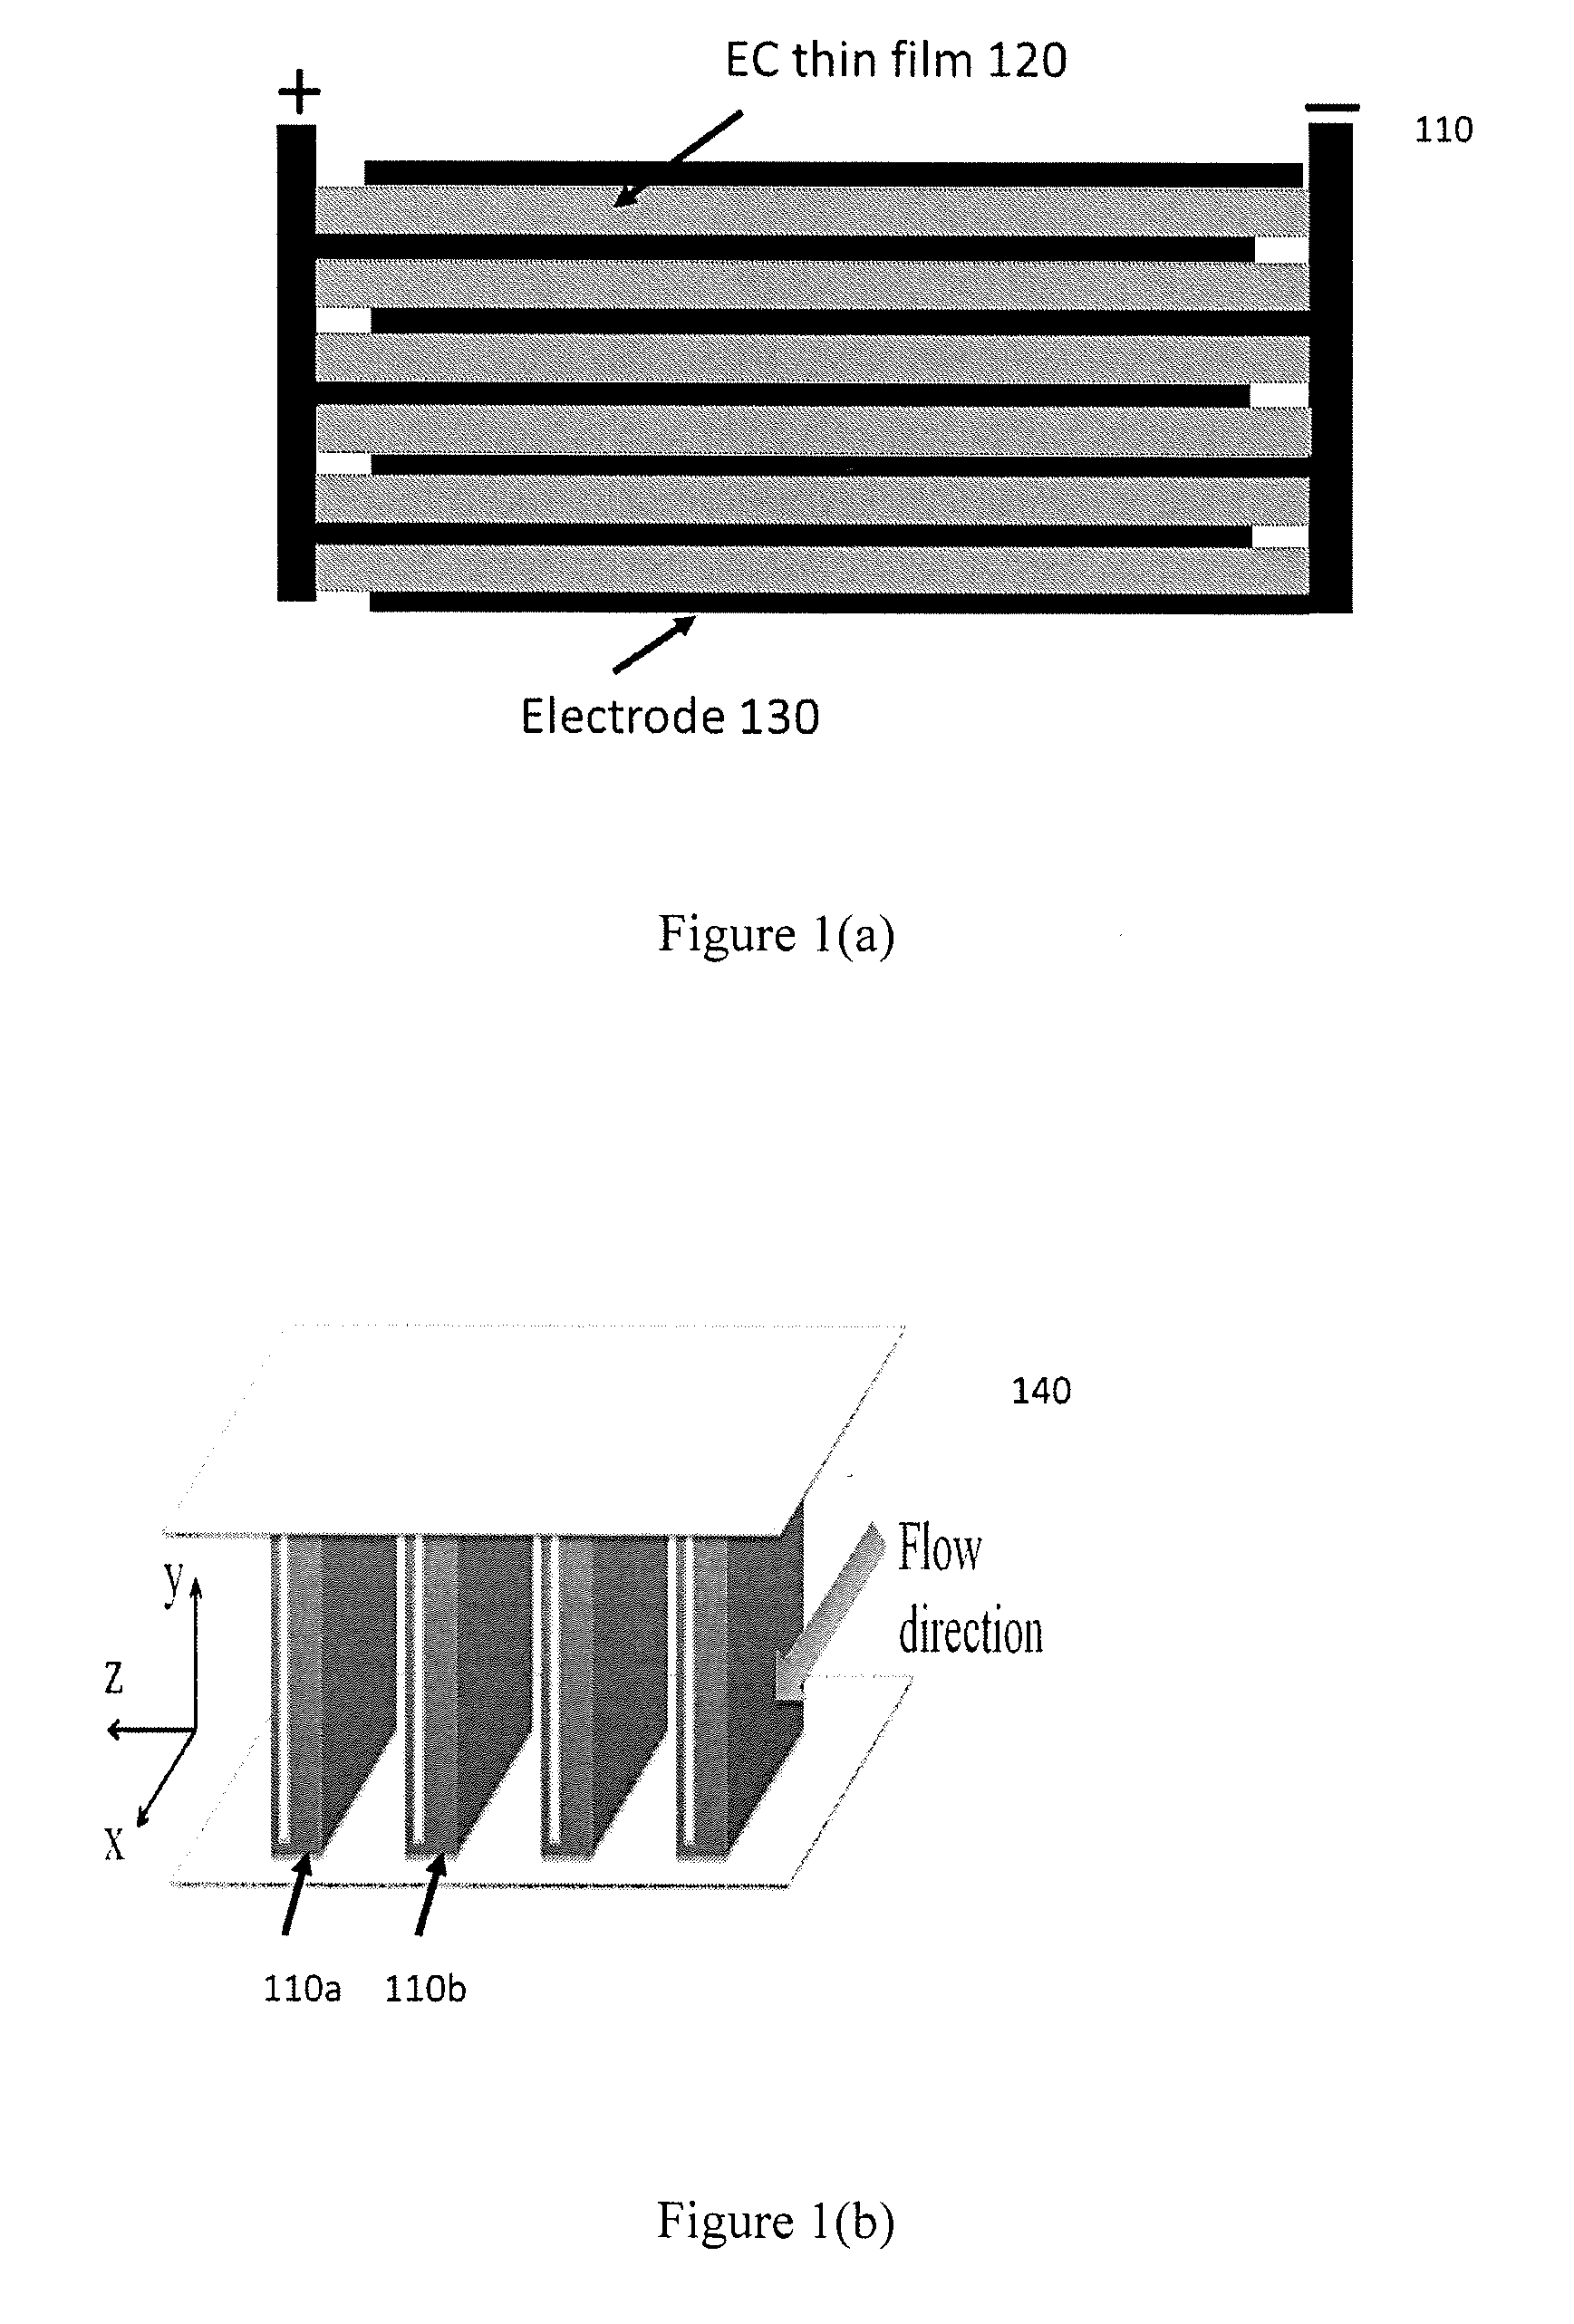 Methods to improve the mechanical performance of electrocaloric polymers in electrocaloric refrigerators